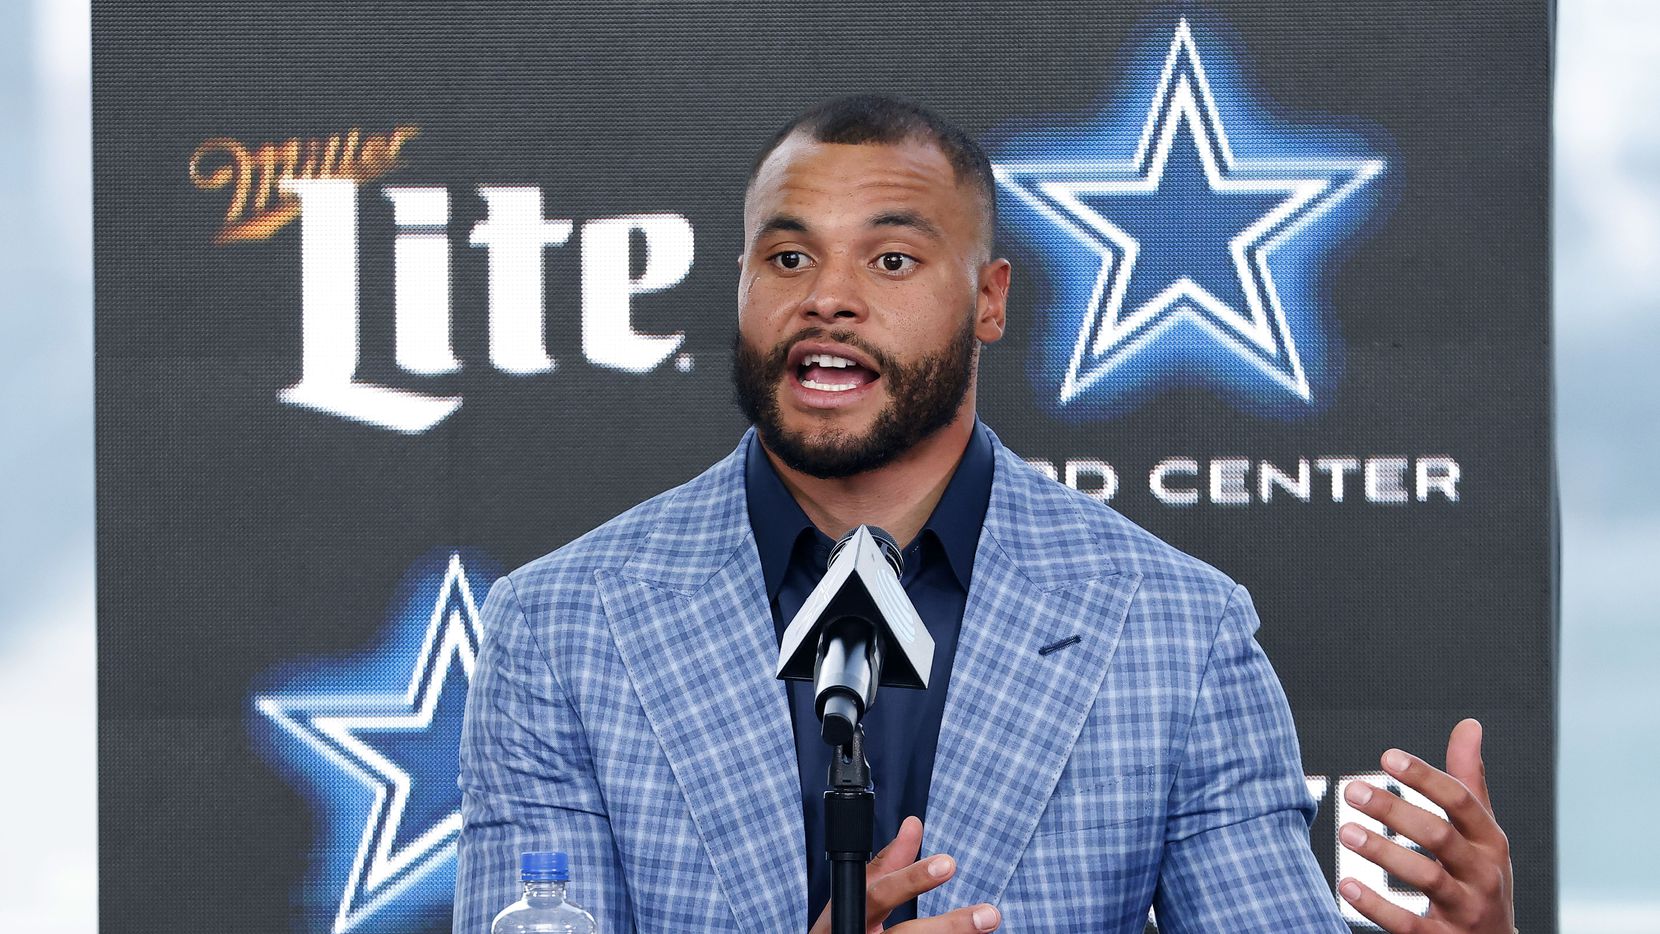 Dallas Cowboys quarterback Dak Prescott responds to media questions at The Star in Frisco, Texas after signing a 4-year, $160 million contract with the team, Wednesday, March 10, 2021.